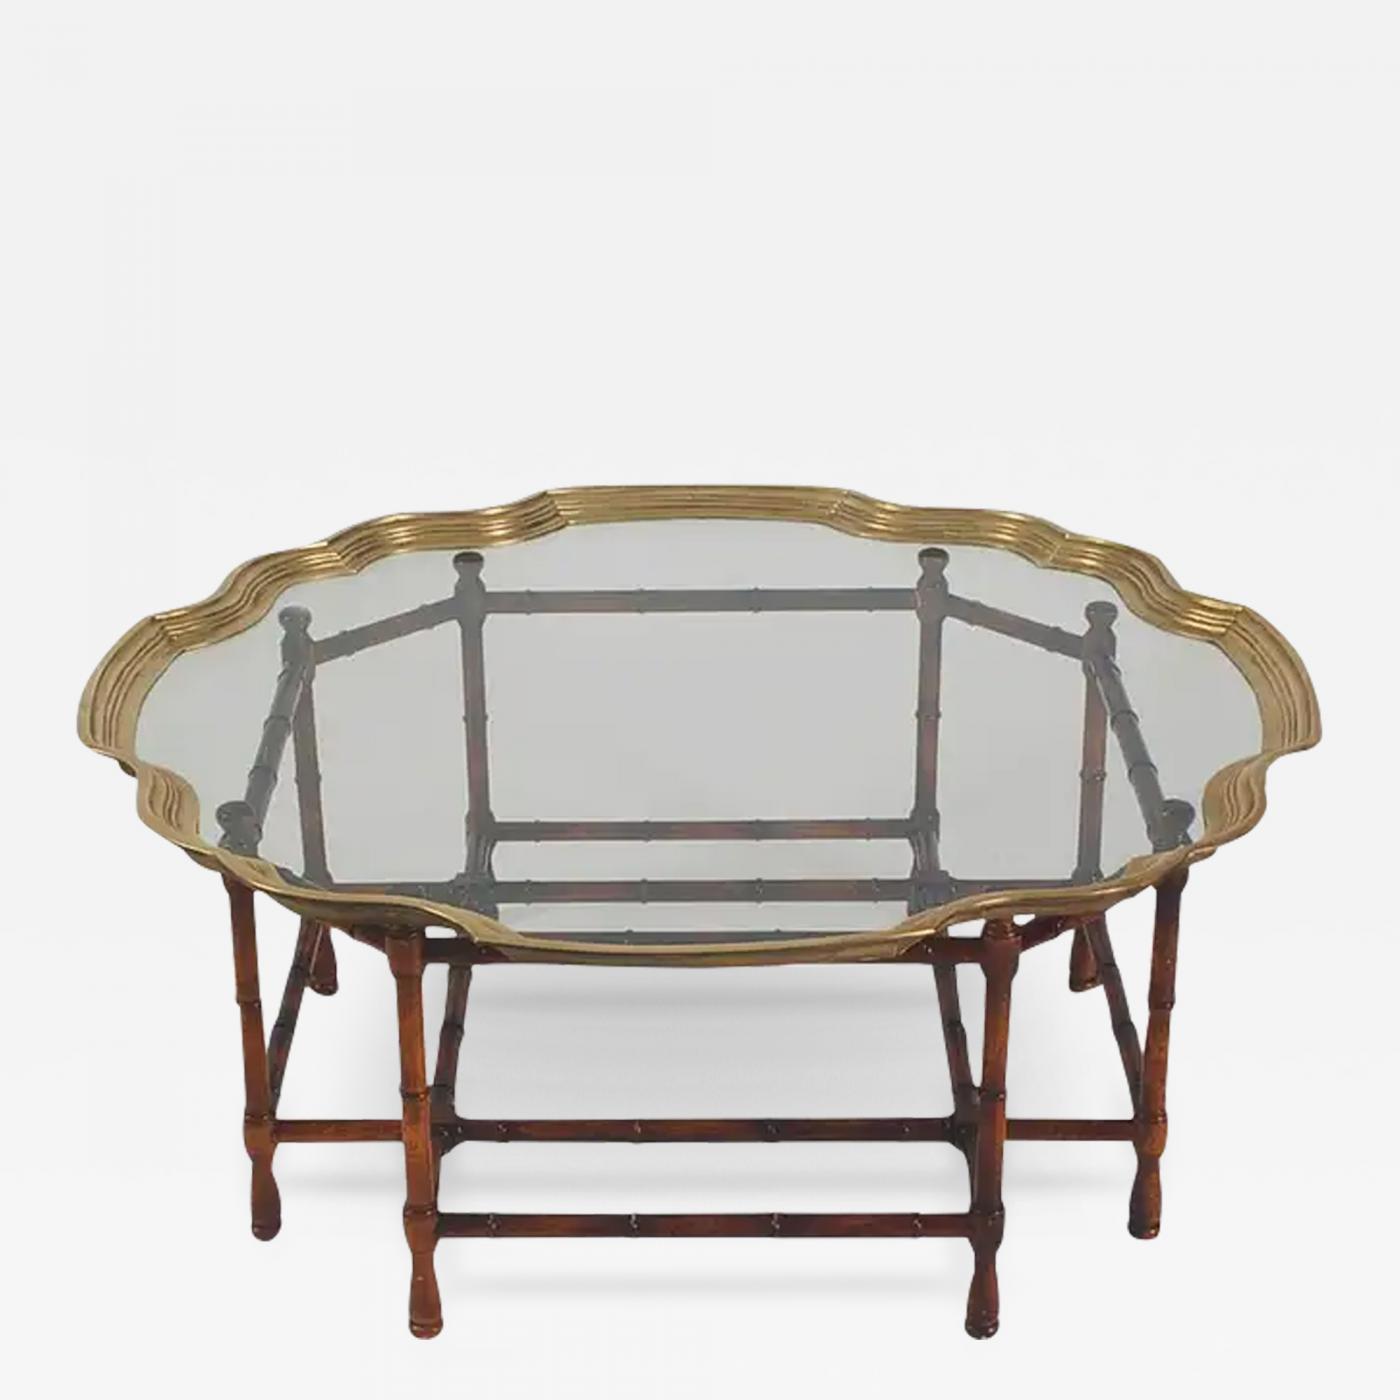 https://cdn.incollect.com/sites/default/files/zoom/Hollywood-Regency-Faux-Bamboo-Brass-Tray-Circular-or-Round-Cocktail-577445-2711607.jpg